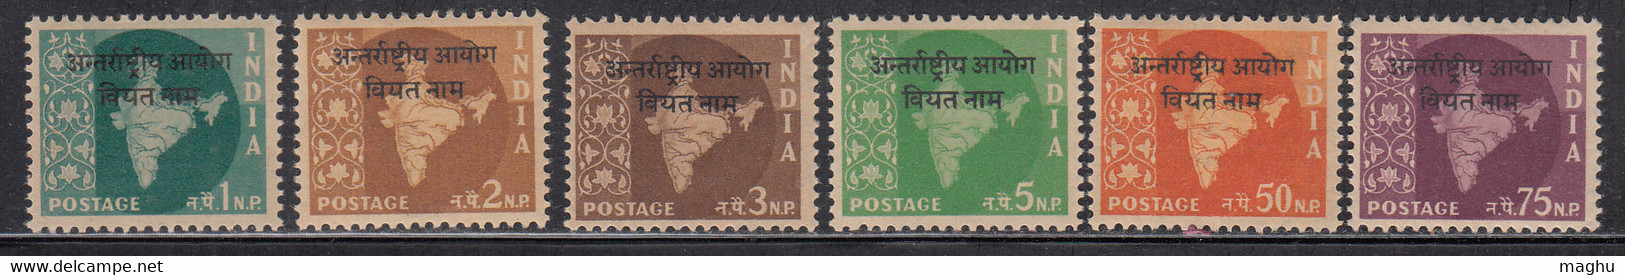 Set Of 6, India MNH 1962, 'Vietnam' Ovpt On Map Series, Ashokan Wmk, Military Service - Military Service Stamp